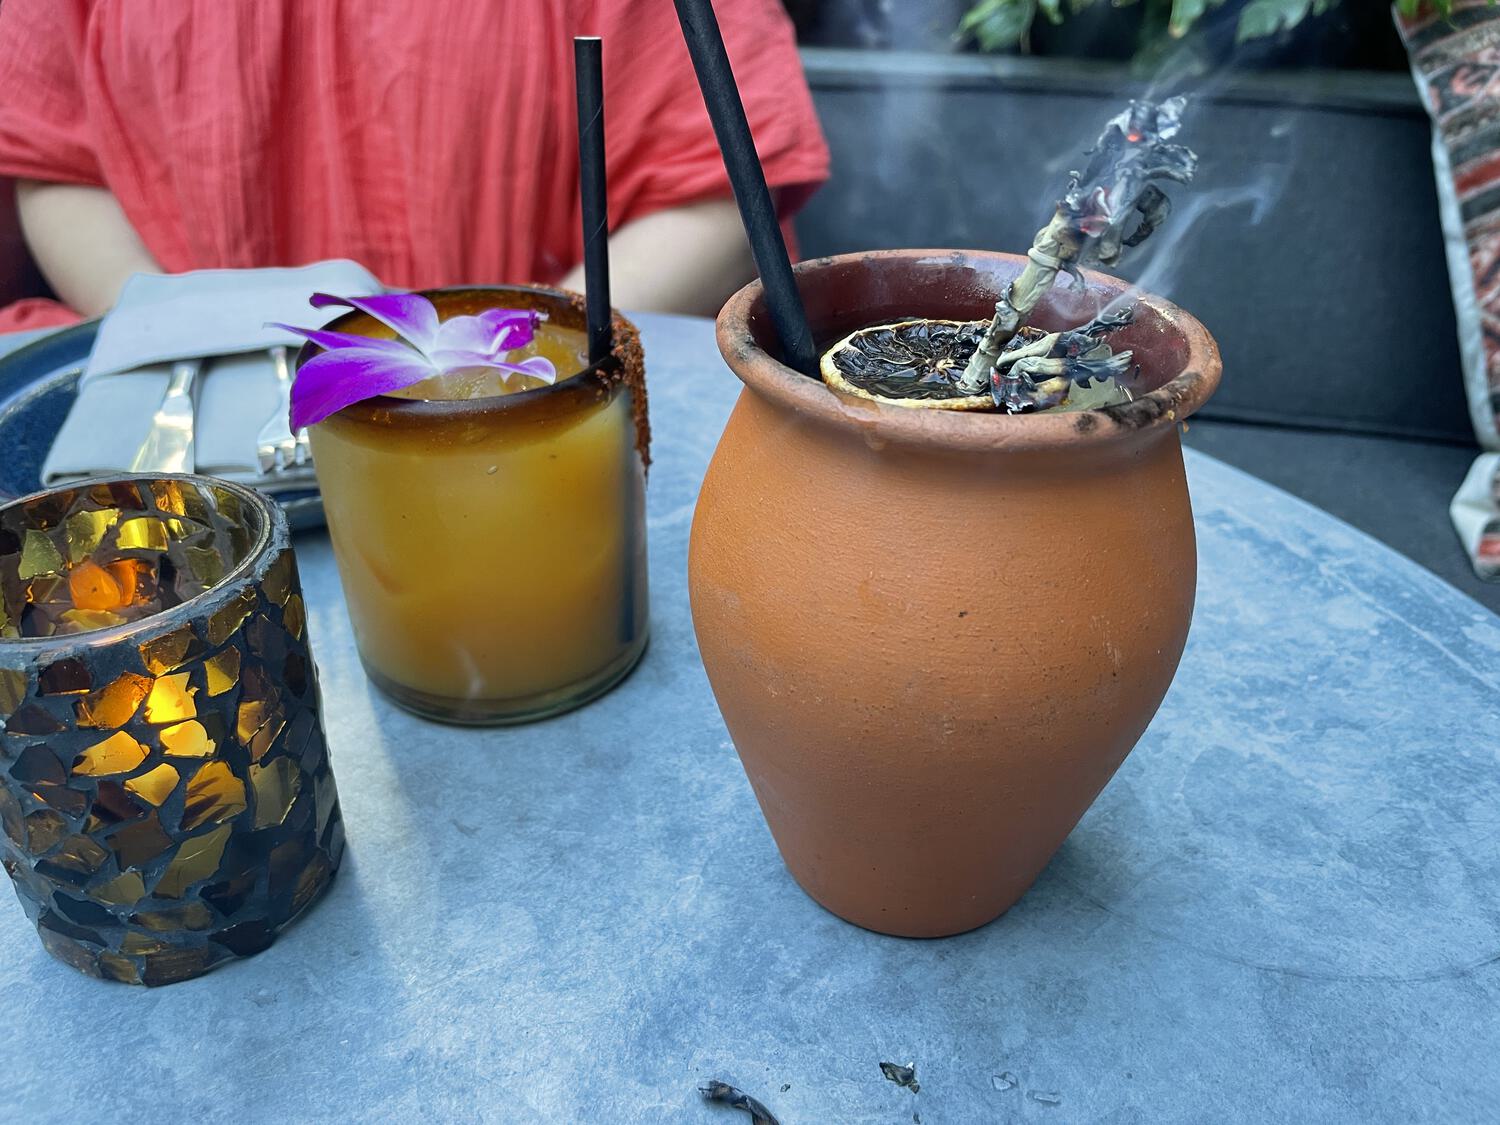 Two cocktails on a restaurant table: one with a hibiscus flower, and one with a burning herb